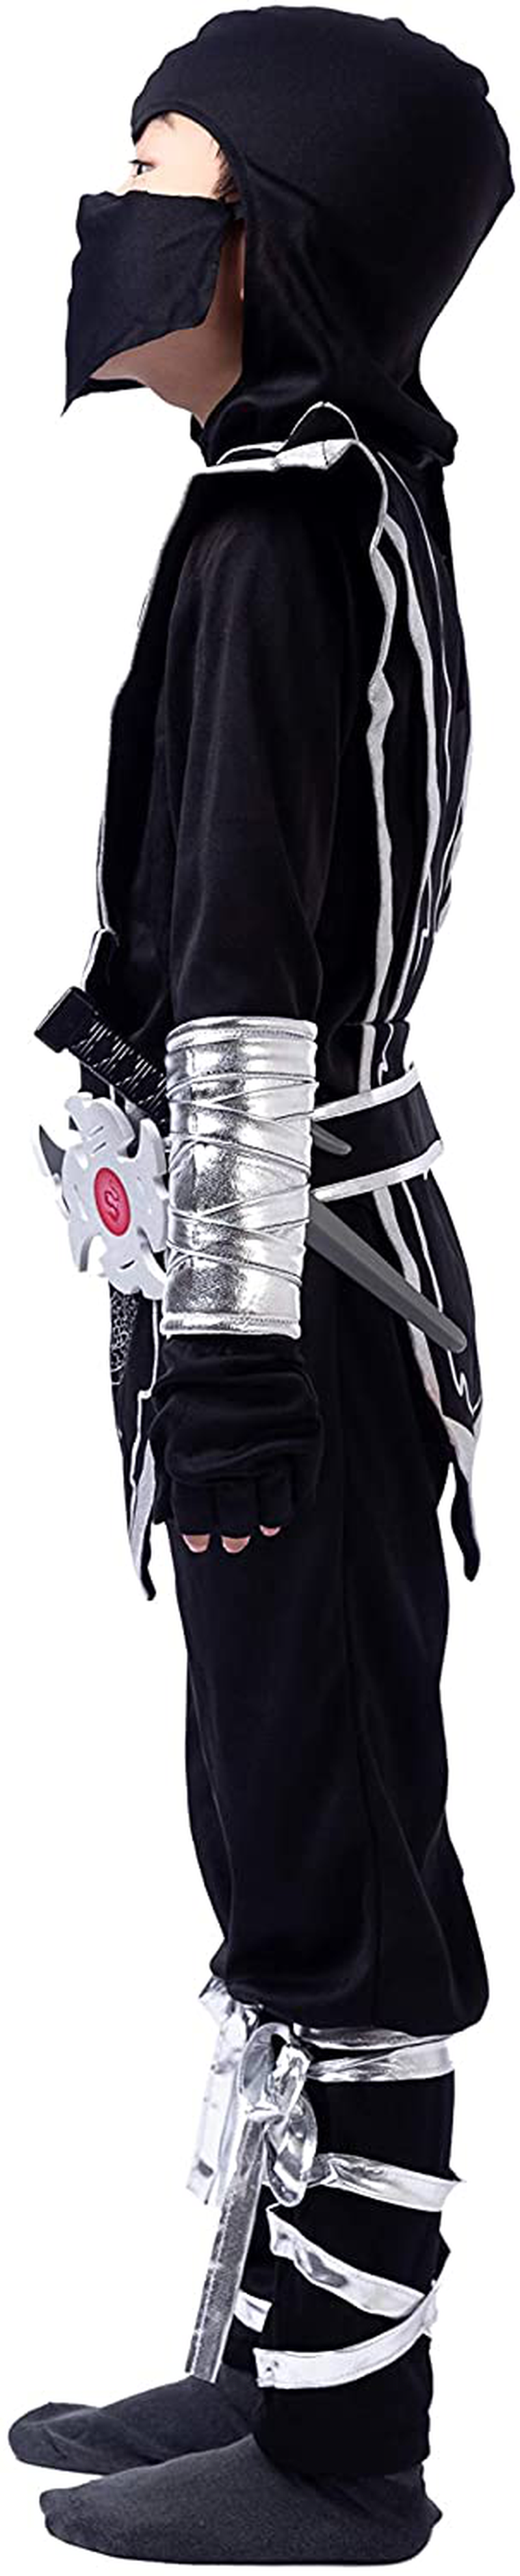 Silver Ninja Deluxe Costume Set with Ninja Foam Accessories Toys for Kids Kung Fu Outfit Halloween Ideas Apparel & Accessories > Costumes & Accessories > Costumes Spooktacular Creations   